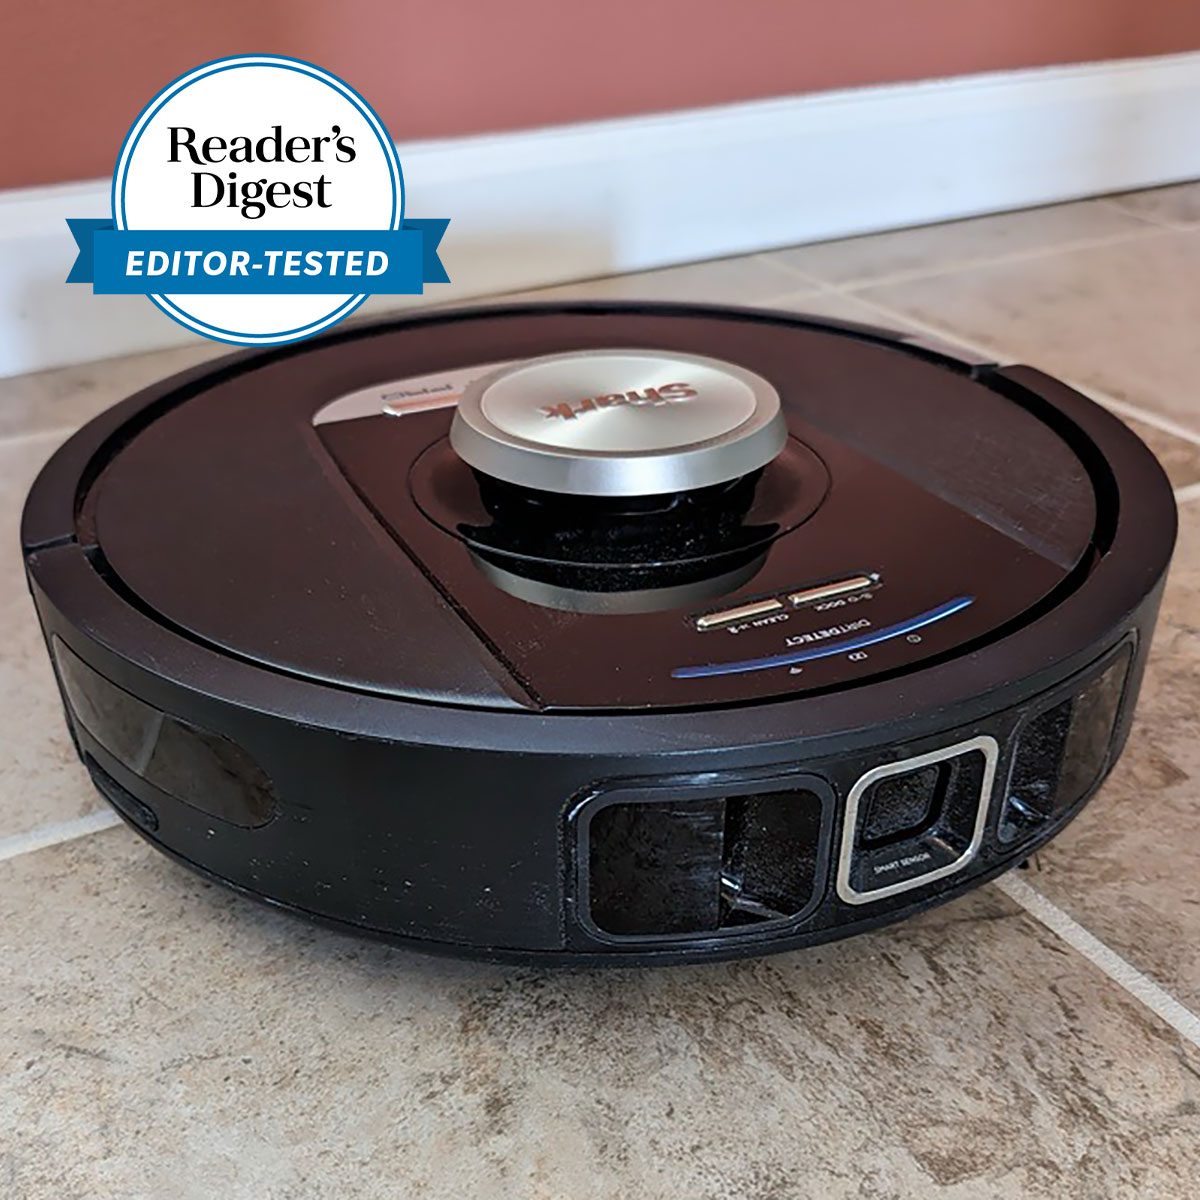 We Tested the New Shark Robot Vacuum to See How Well it Cleans